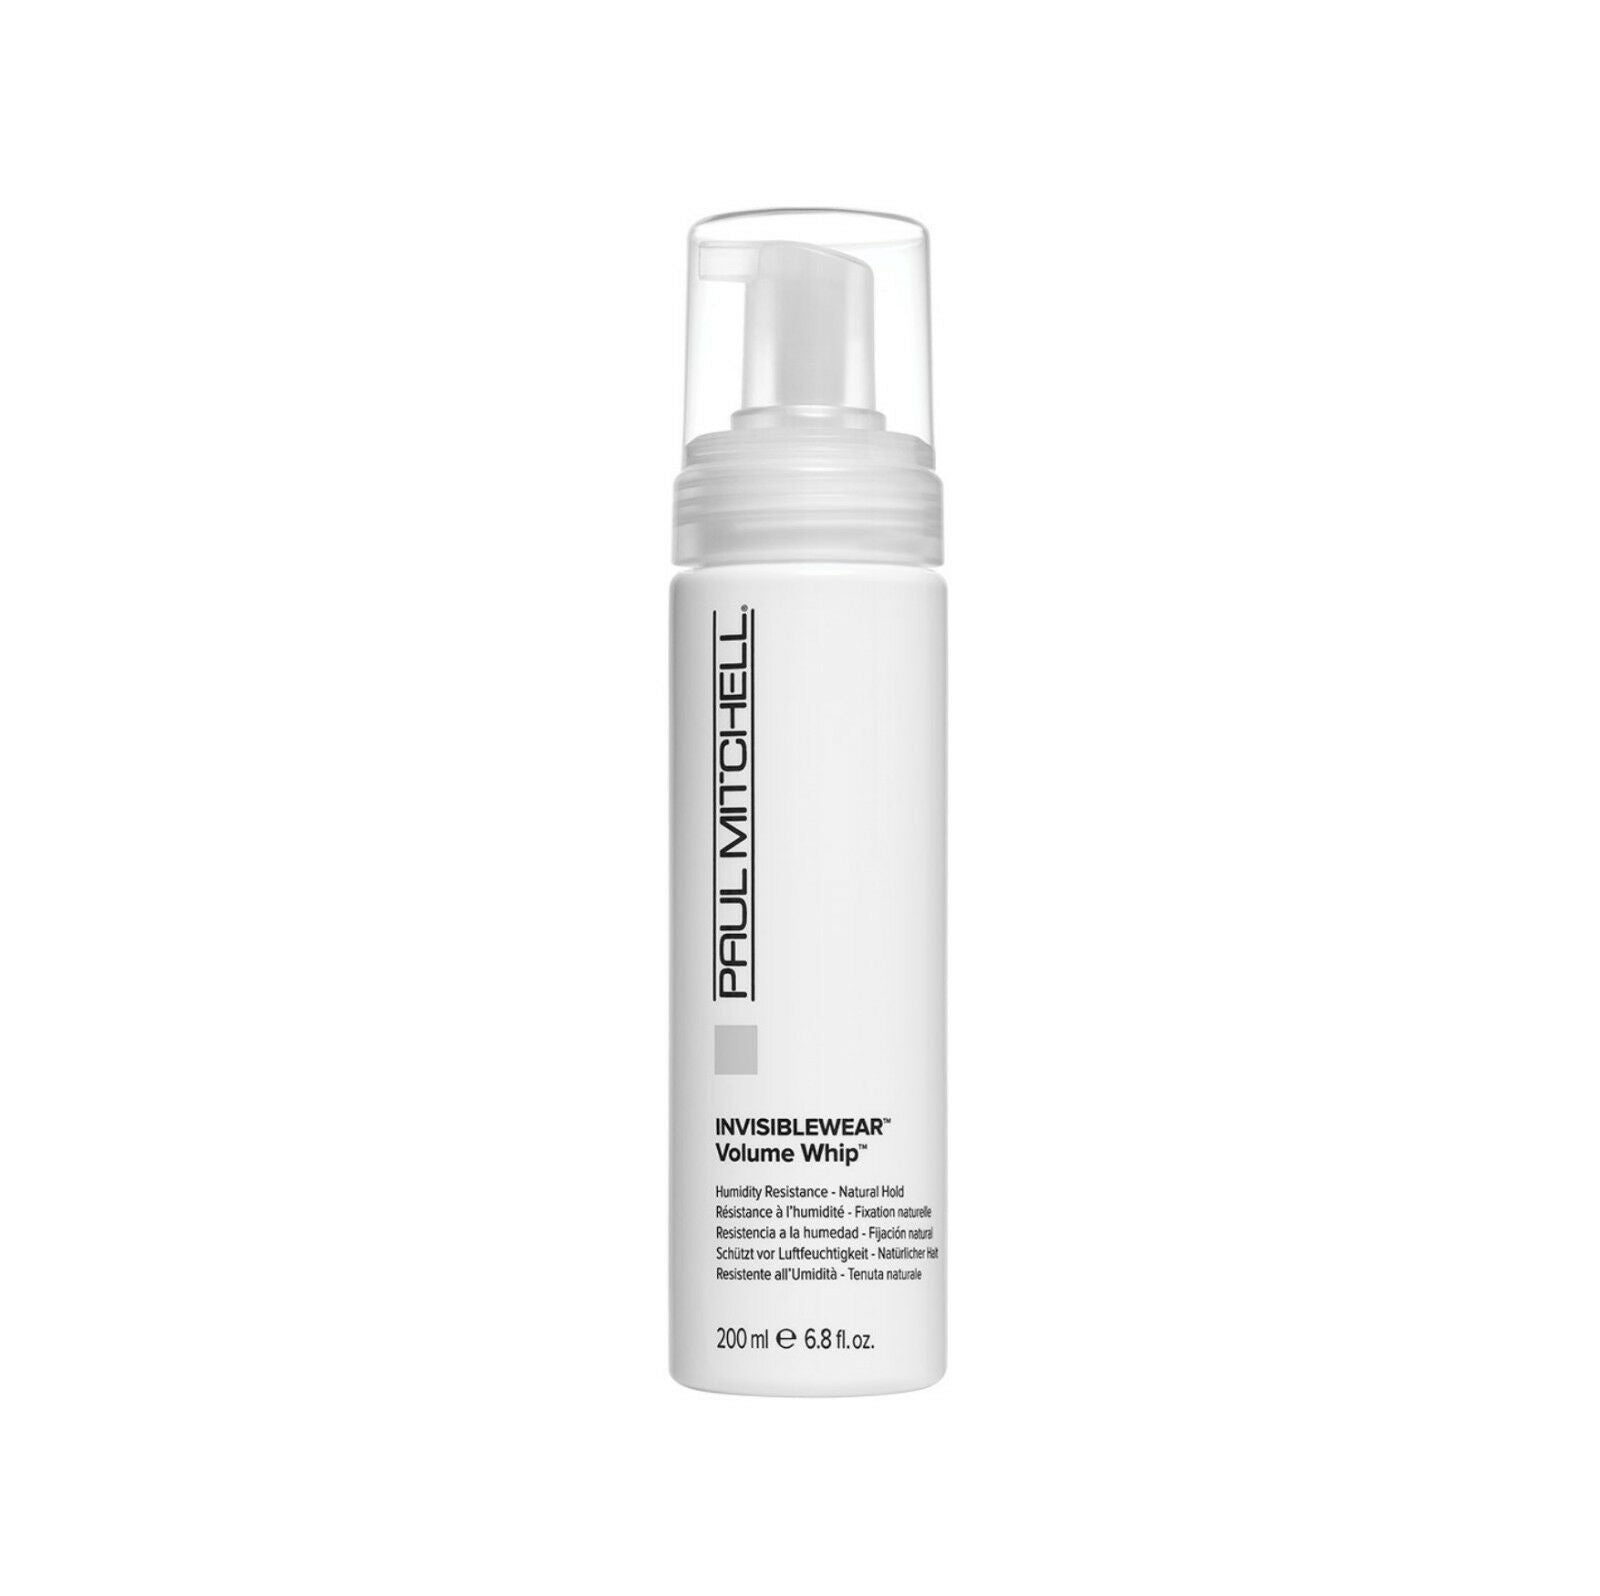 iaahhaircare,Paul Mitchell INVISIBLEWEAR Volume Whip Humidity Resistance Nat Hold 200ml x 1,Styling Products,Invisible Wear Paul Mitchell